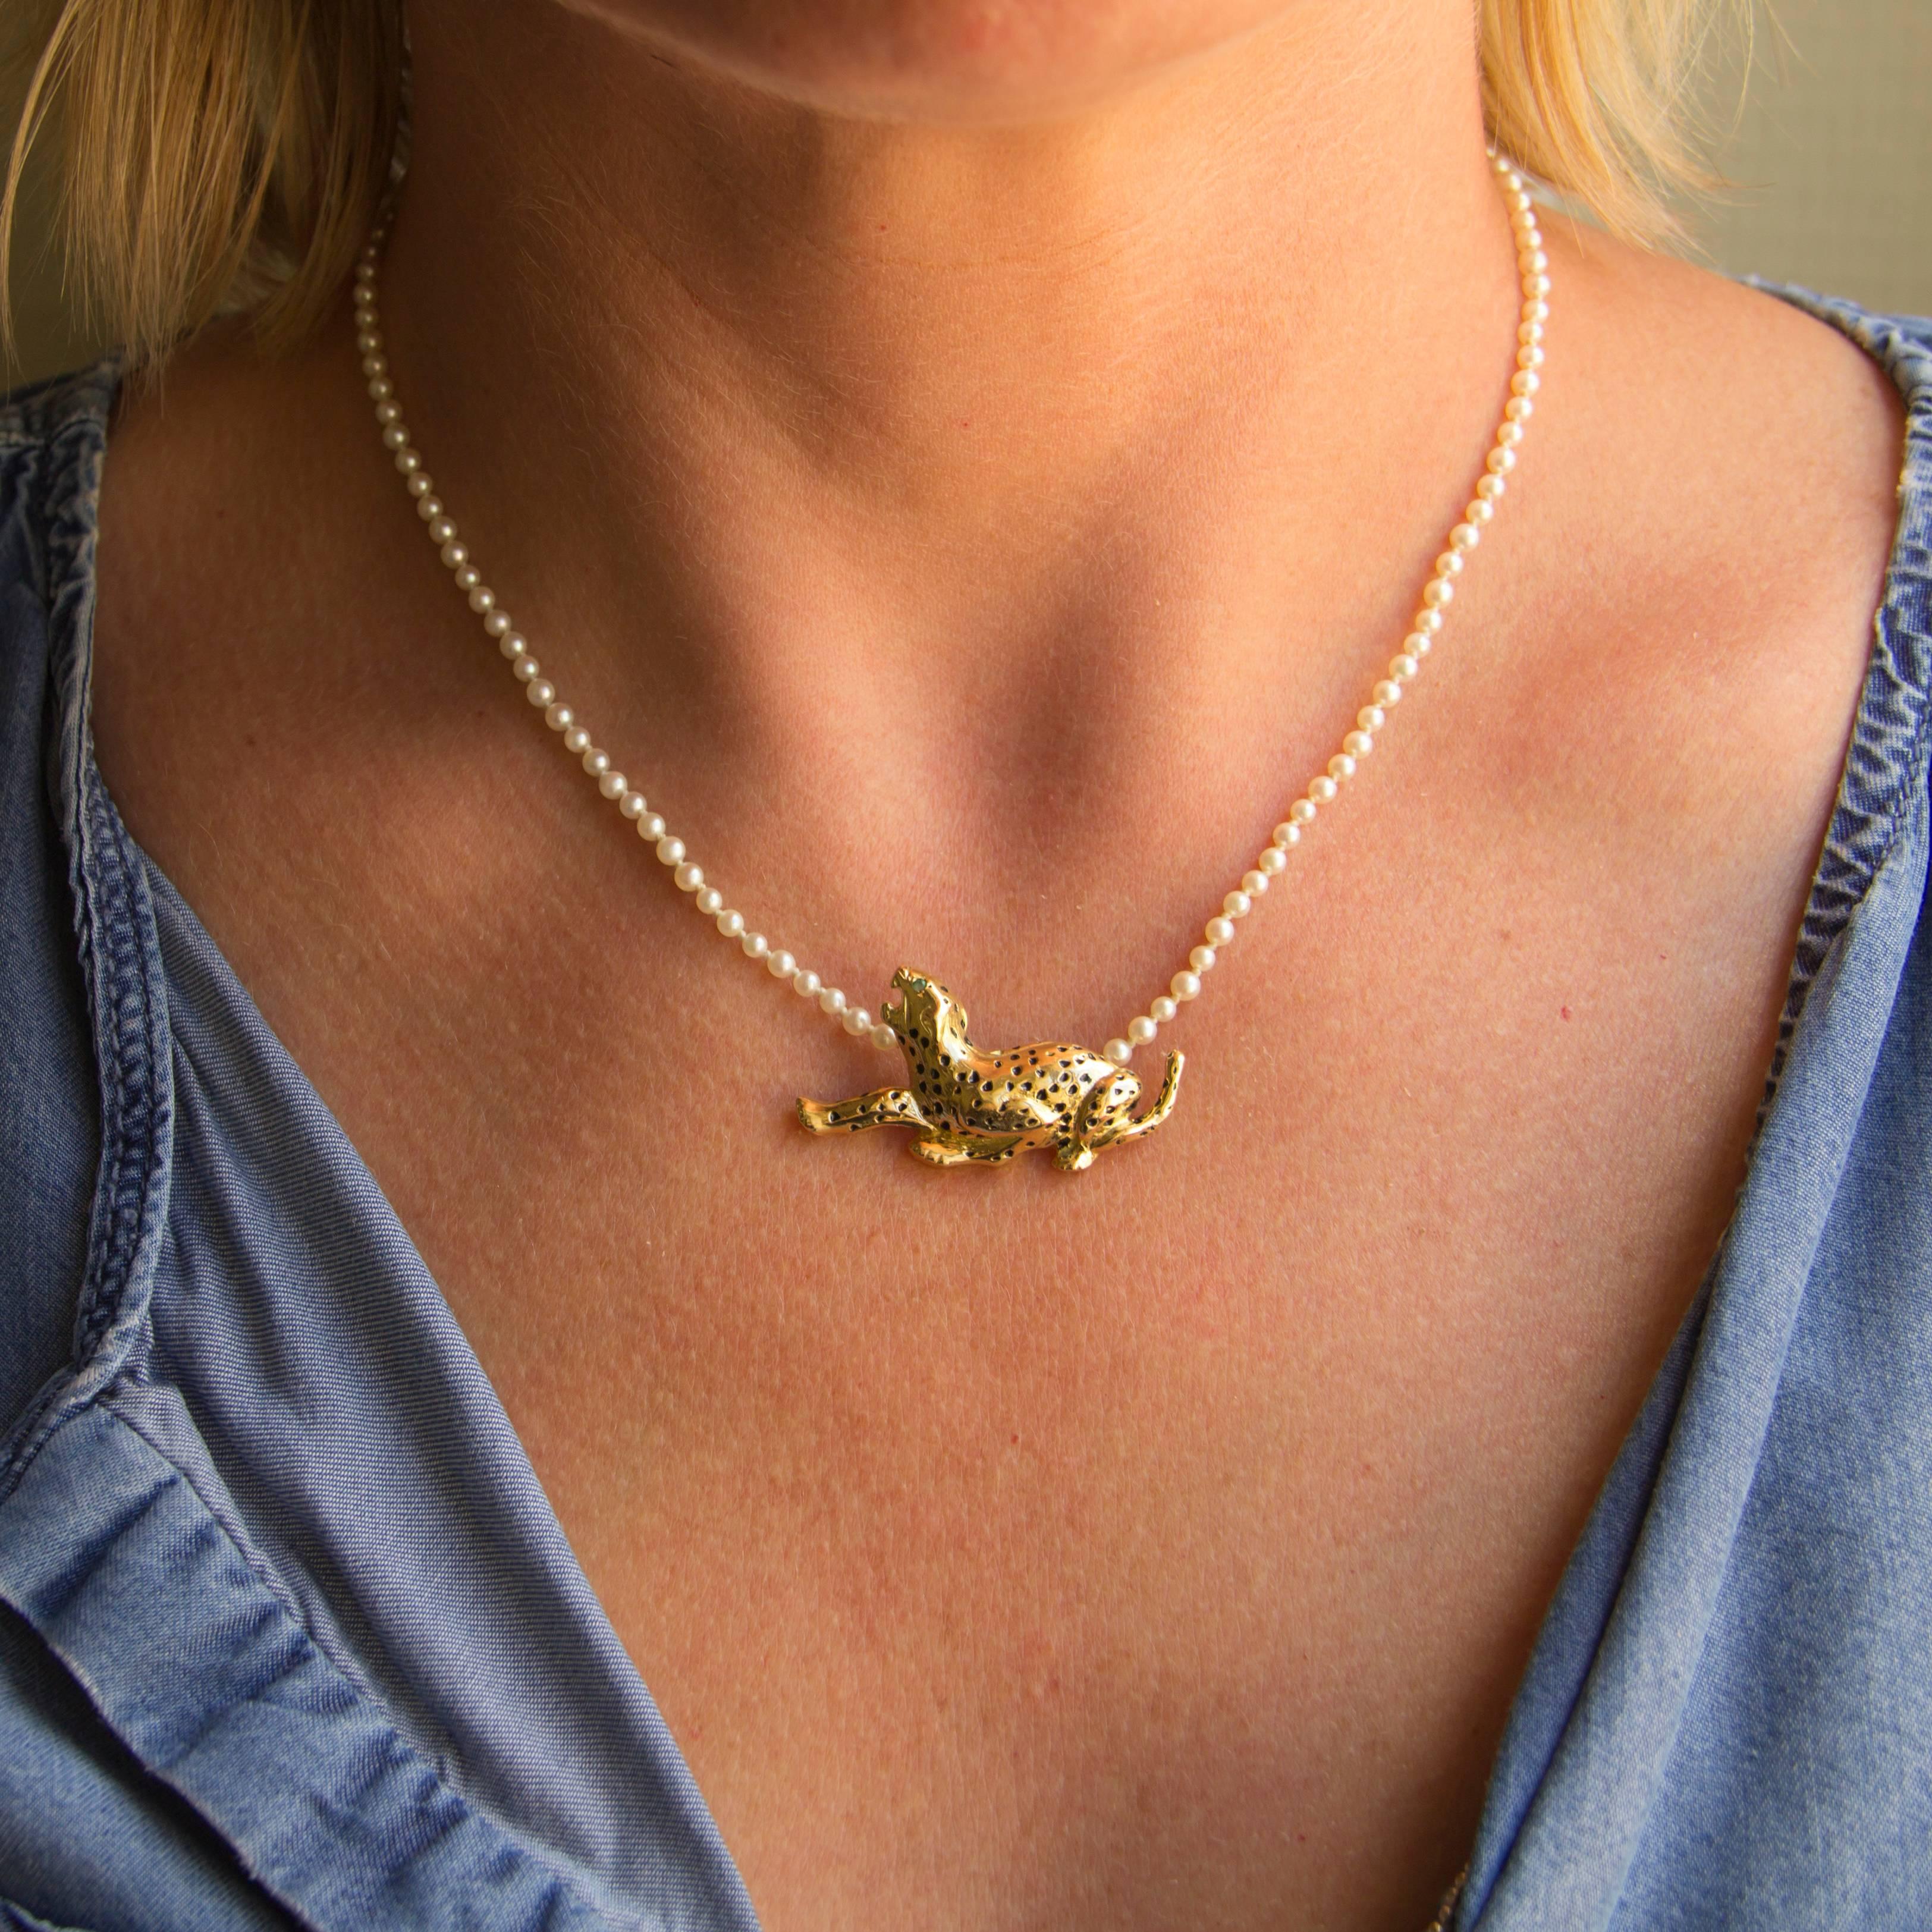 Retro Pearl Necklace and Enamel Gold Panther Motif